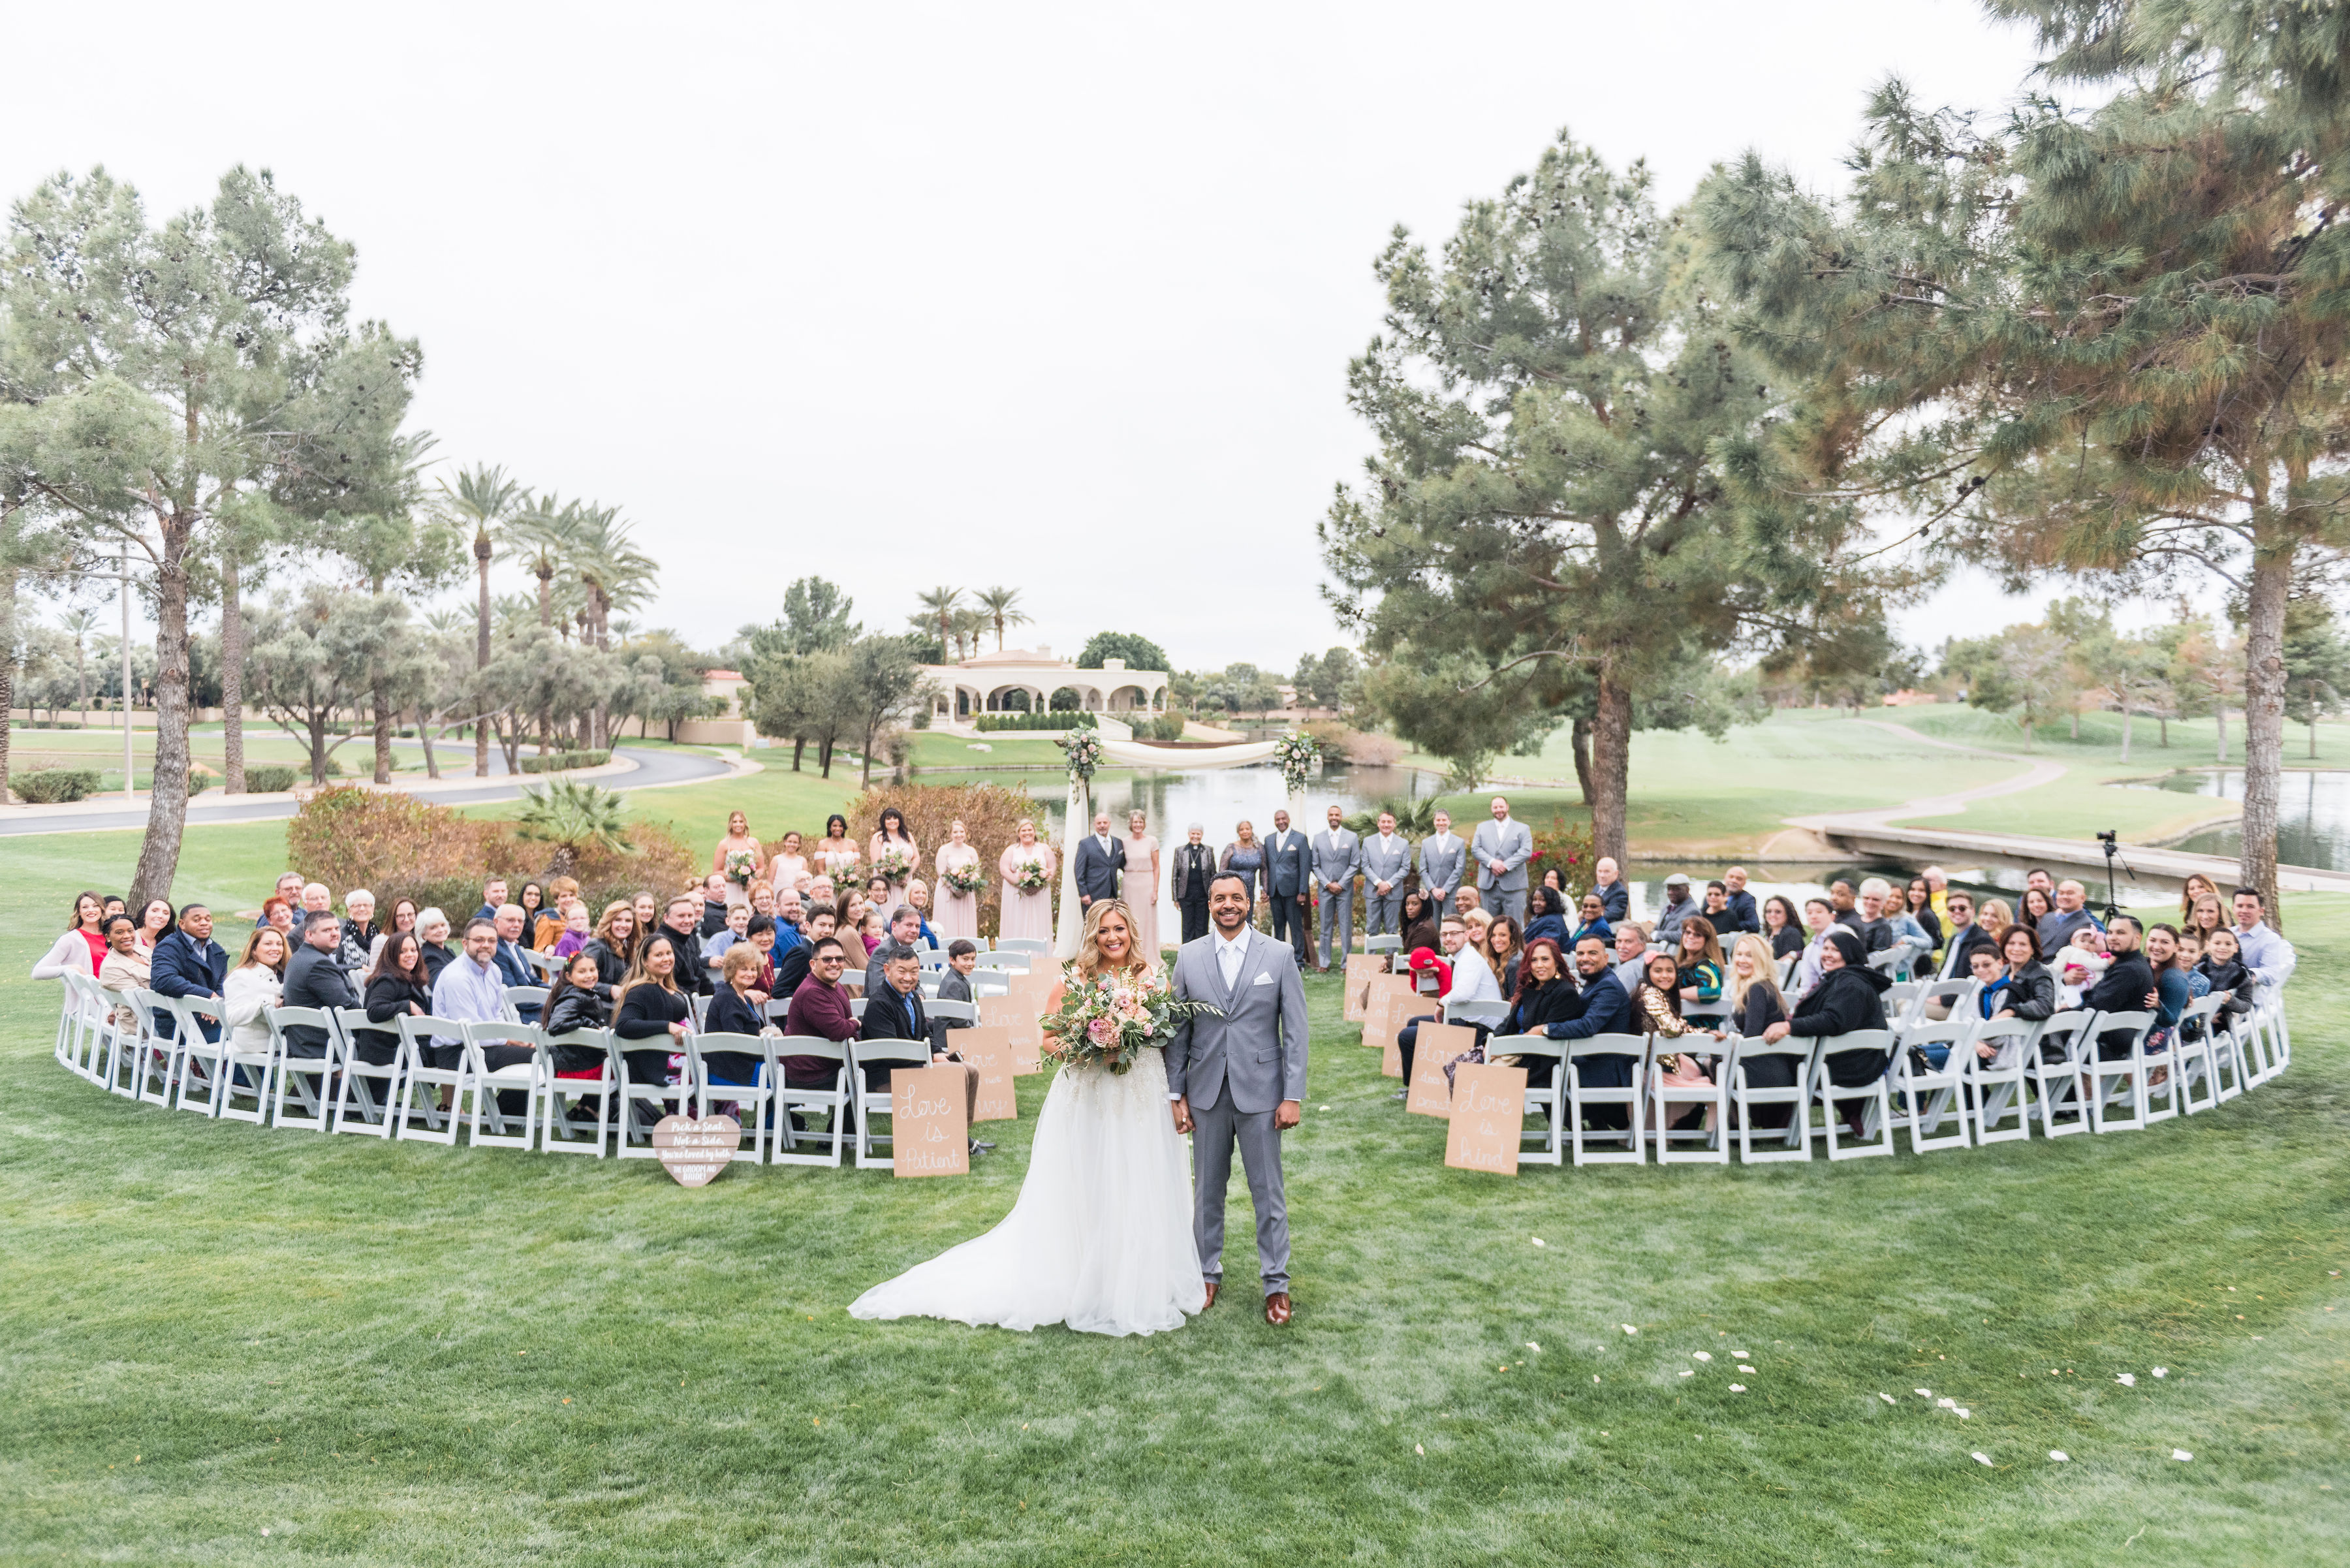 newlyweds in front of the lower garden outdoor wedding ceremony site at Ocotillo Oasis